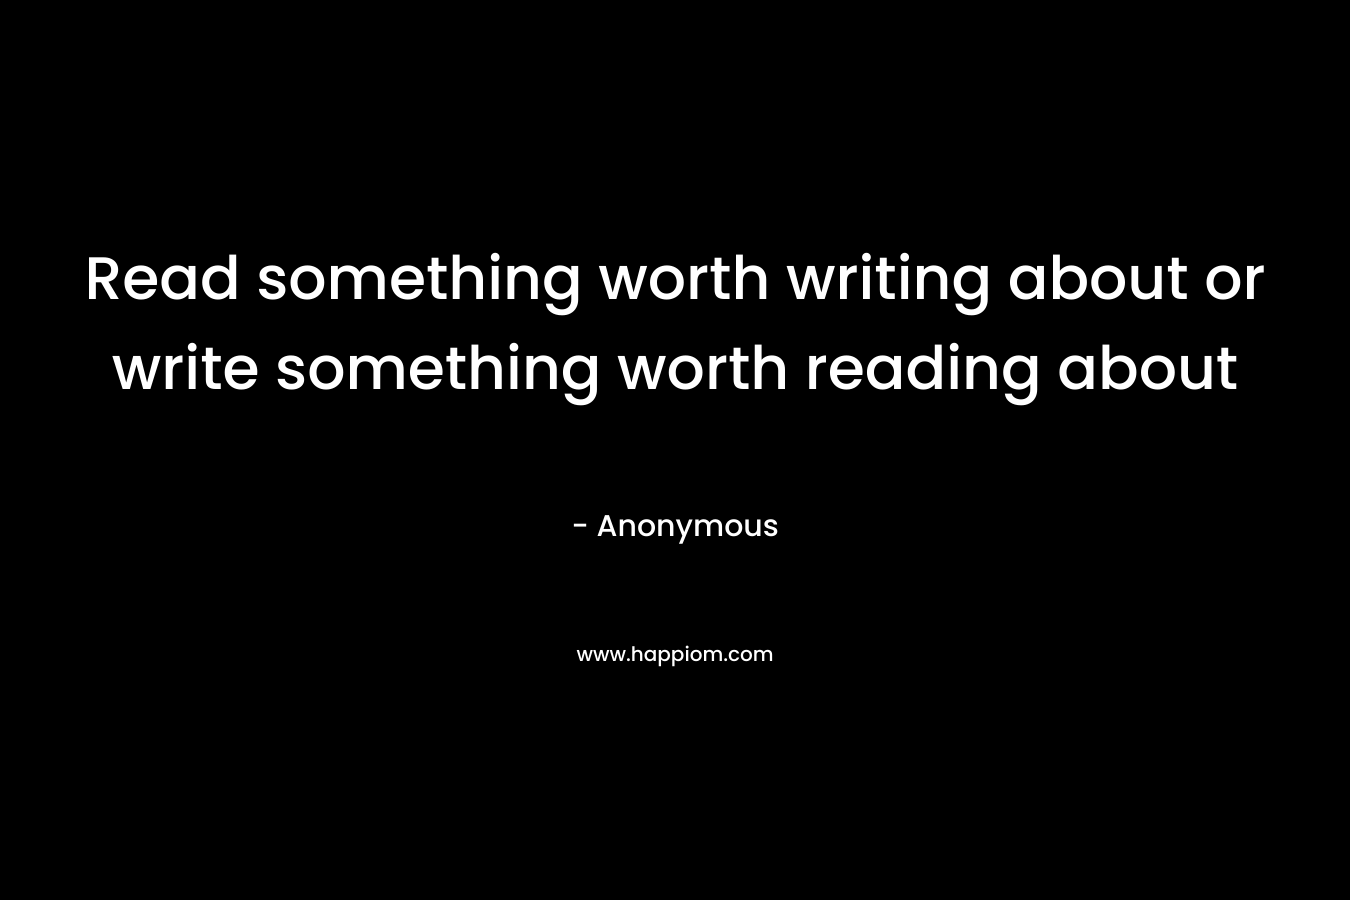 Read something worth writing about or write something worth reading about